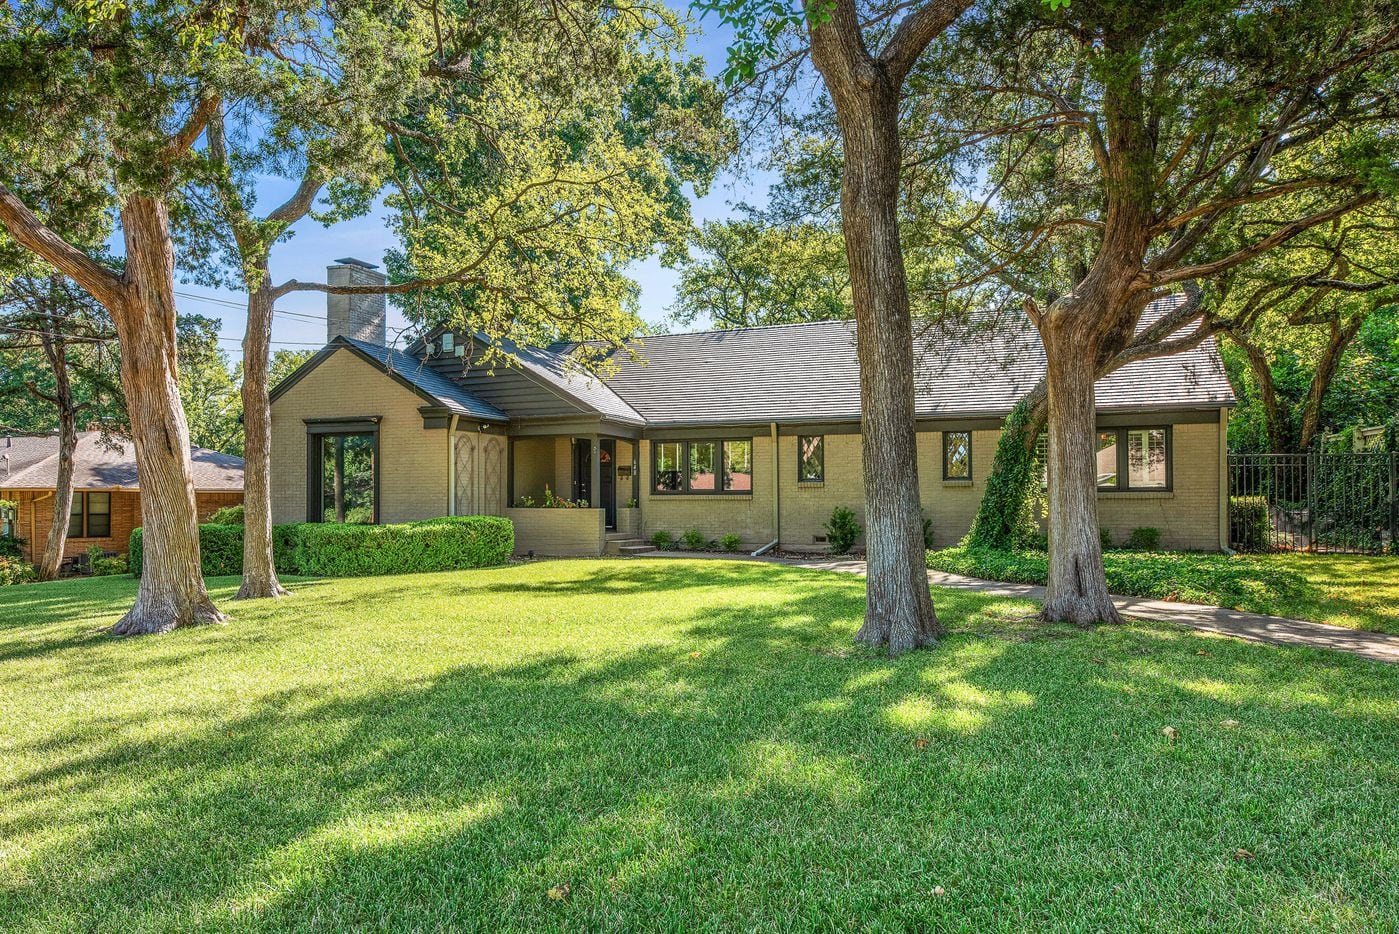 A look at 648 N. Manus Drive in Dallas, one of the houses on the 2019 Heritage Oak Cliff...